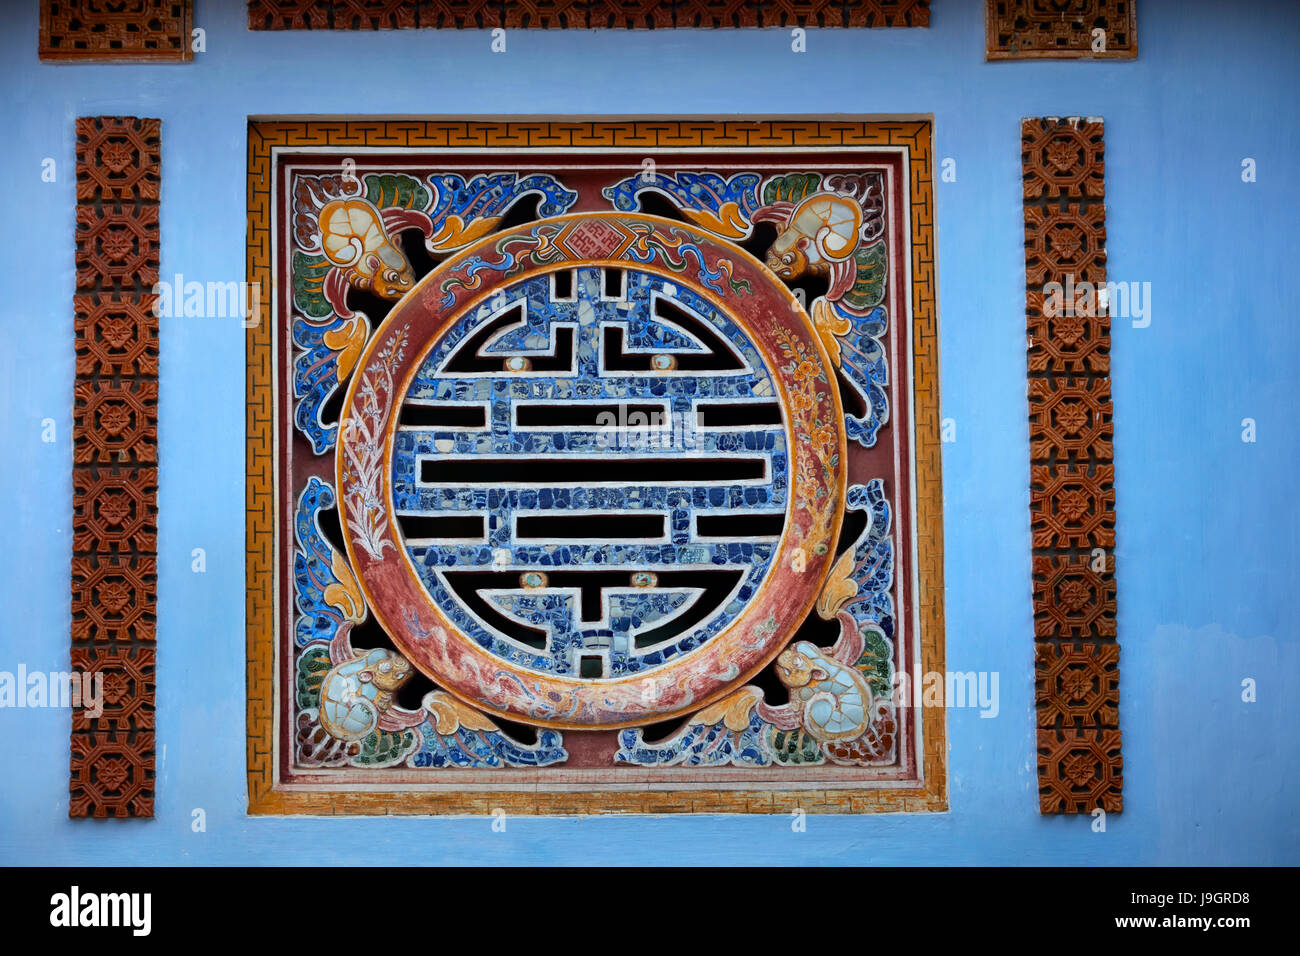 Detail of decorative window in historic Hue Citadel (Imperial City), Hue, North Central Coast, Vietnam Stock Photo